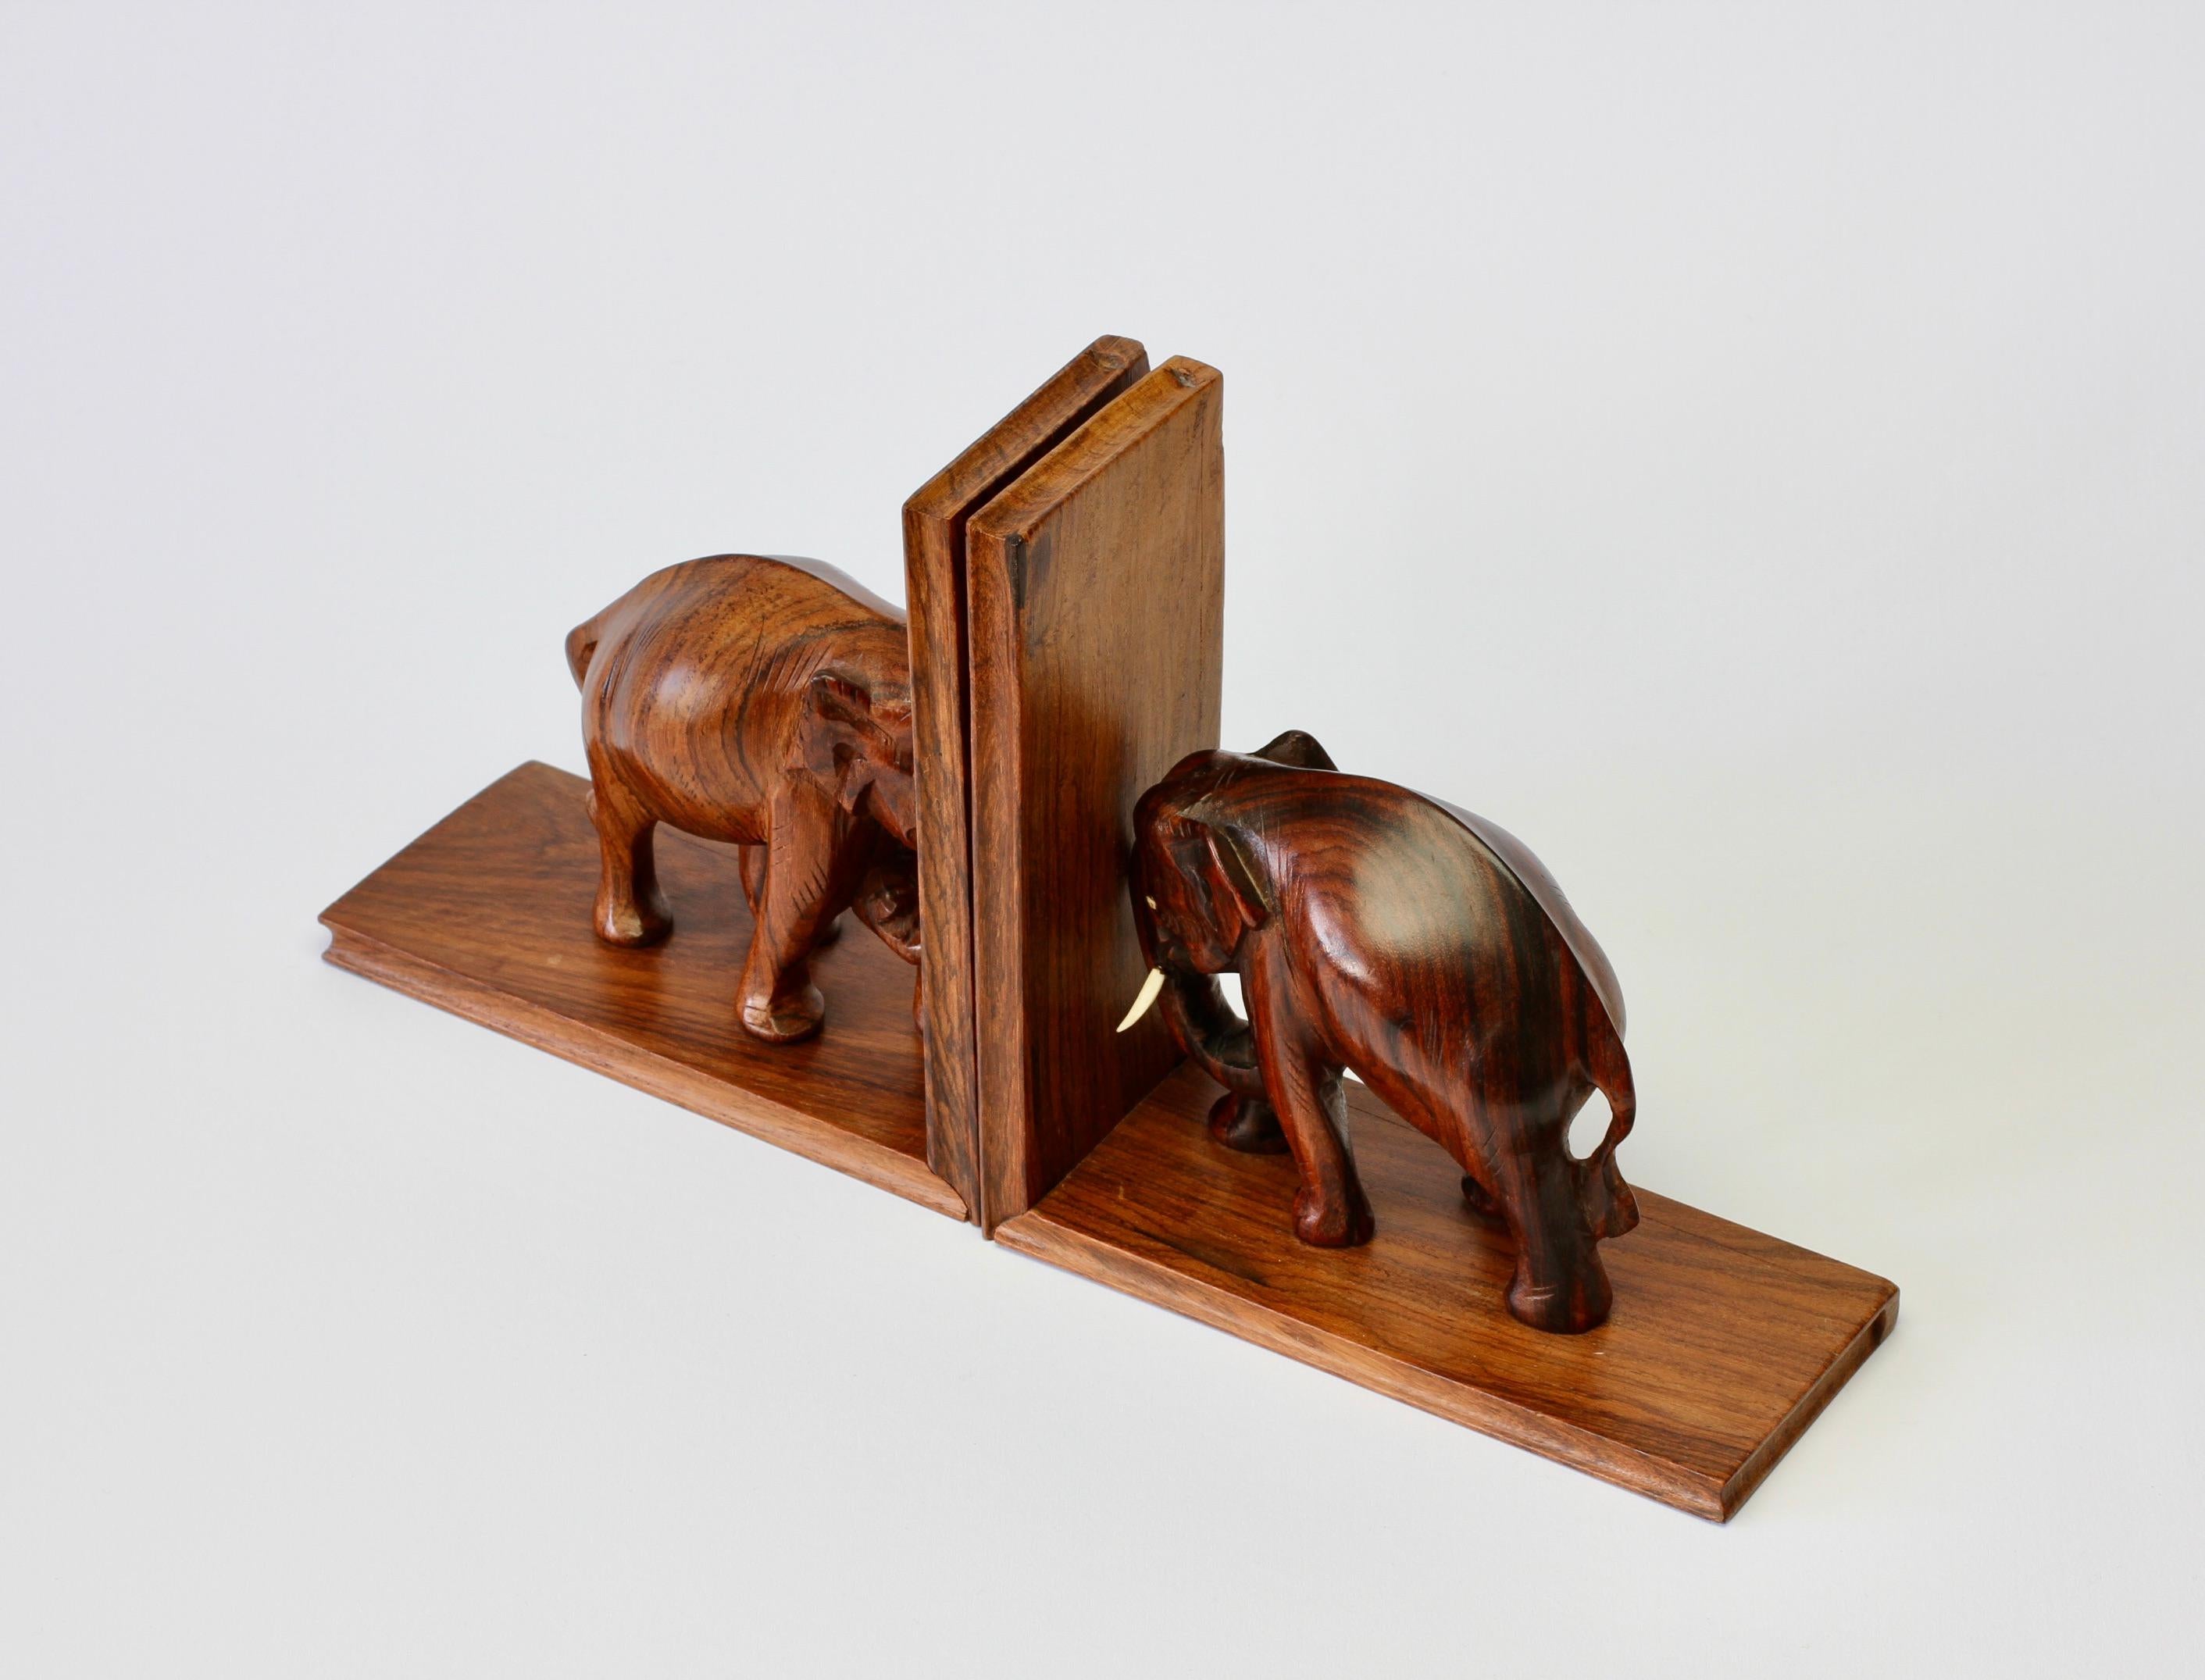 Hand Carved Wooden Book Ends with Elephant Sculptures / Figures, circa 1960s 2